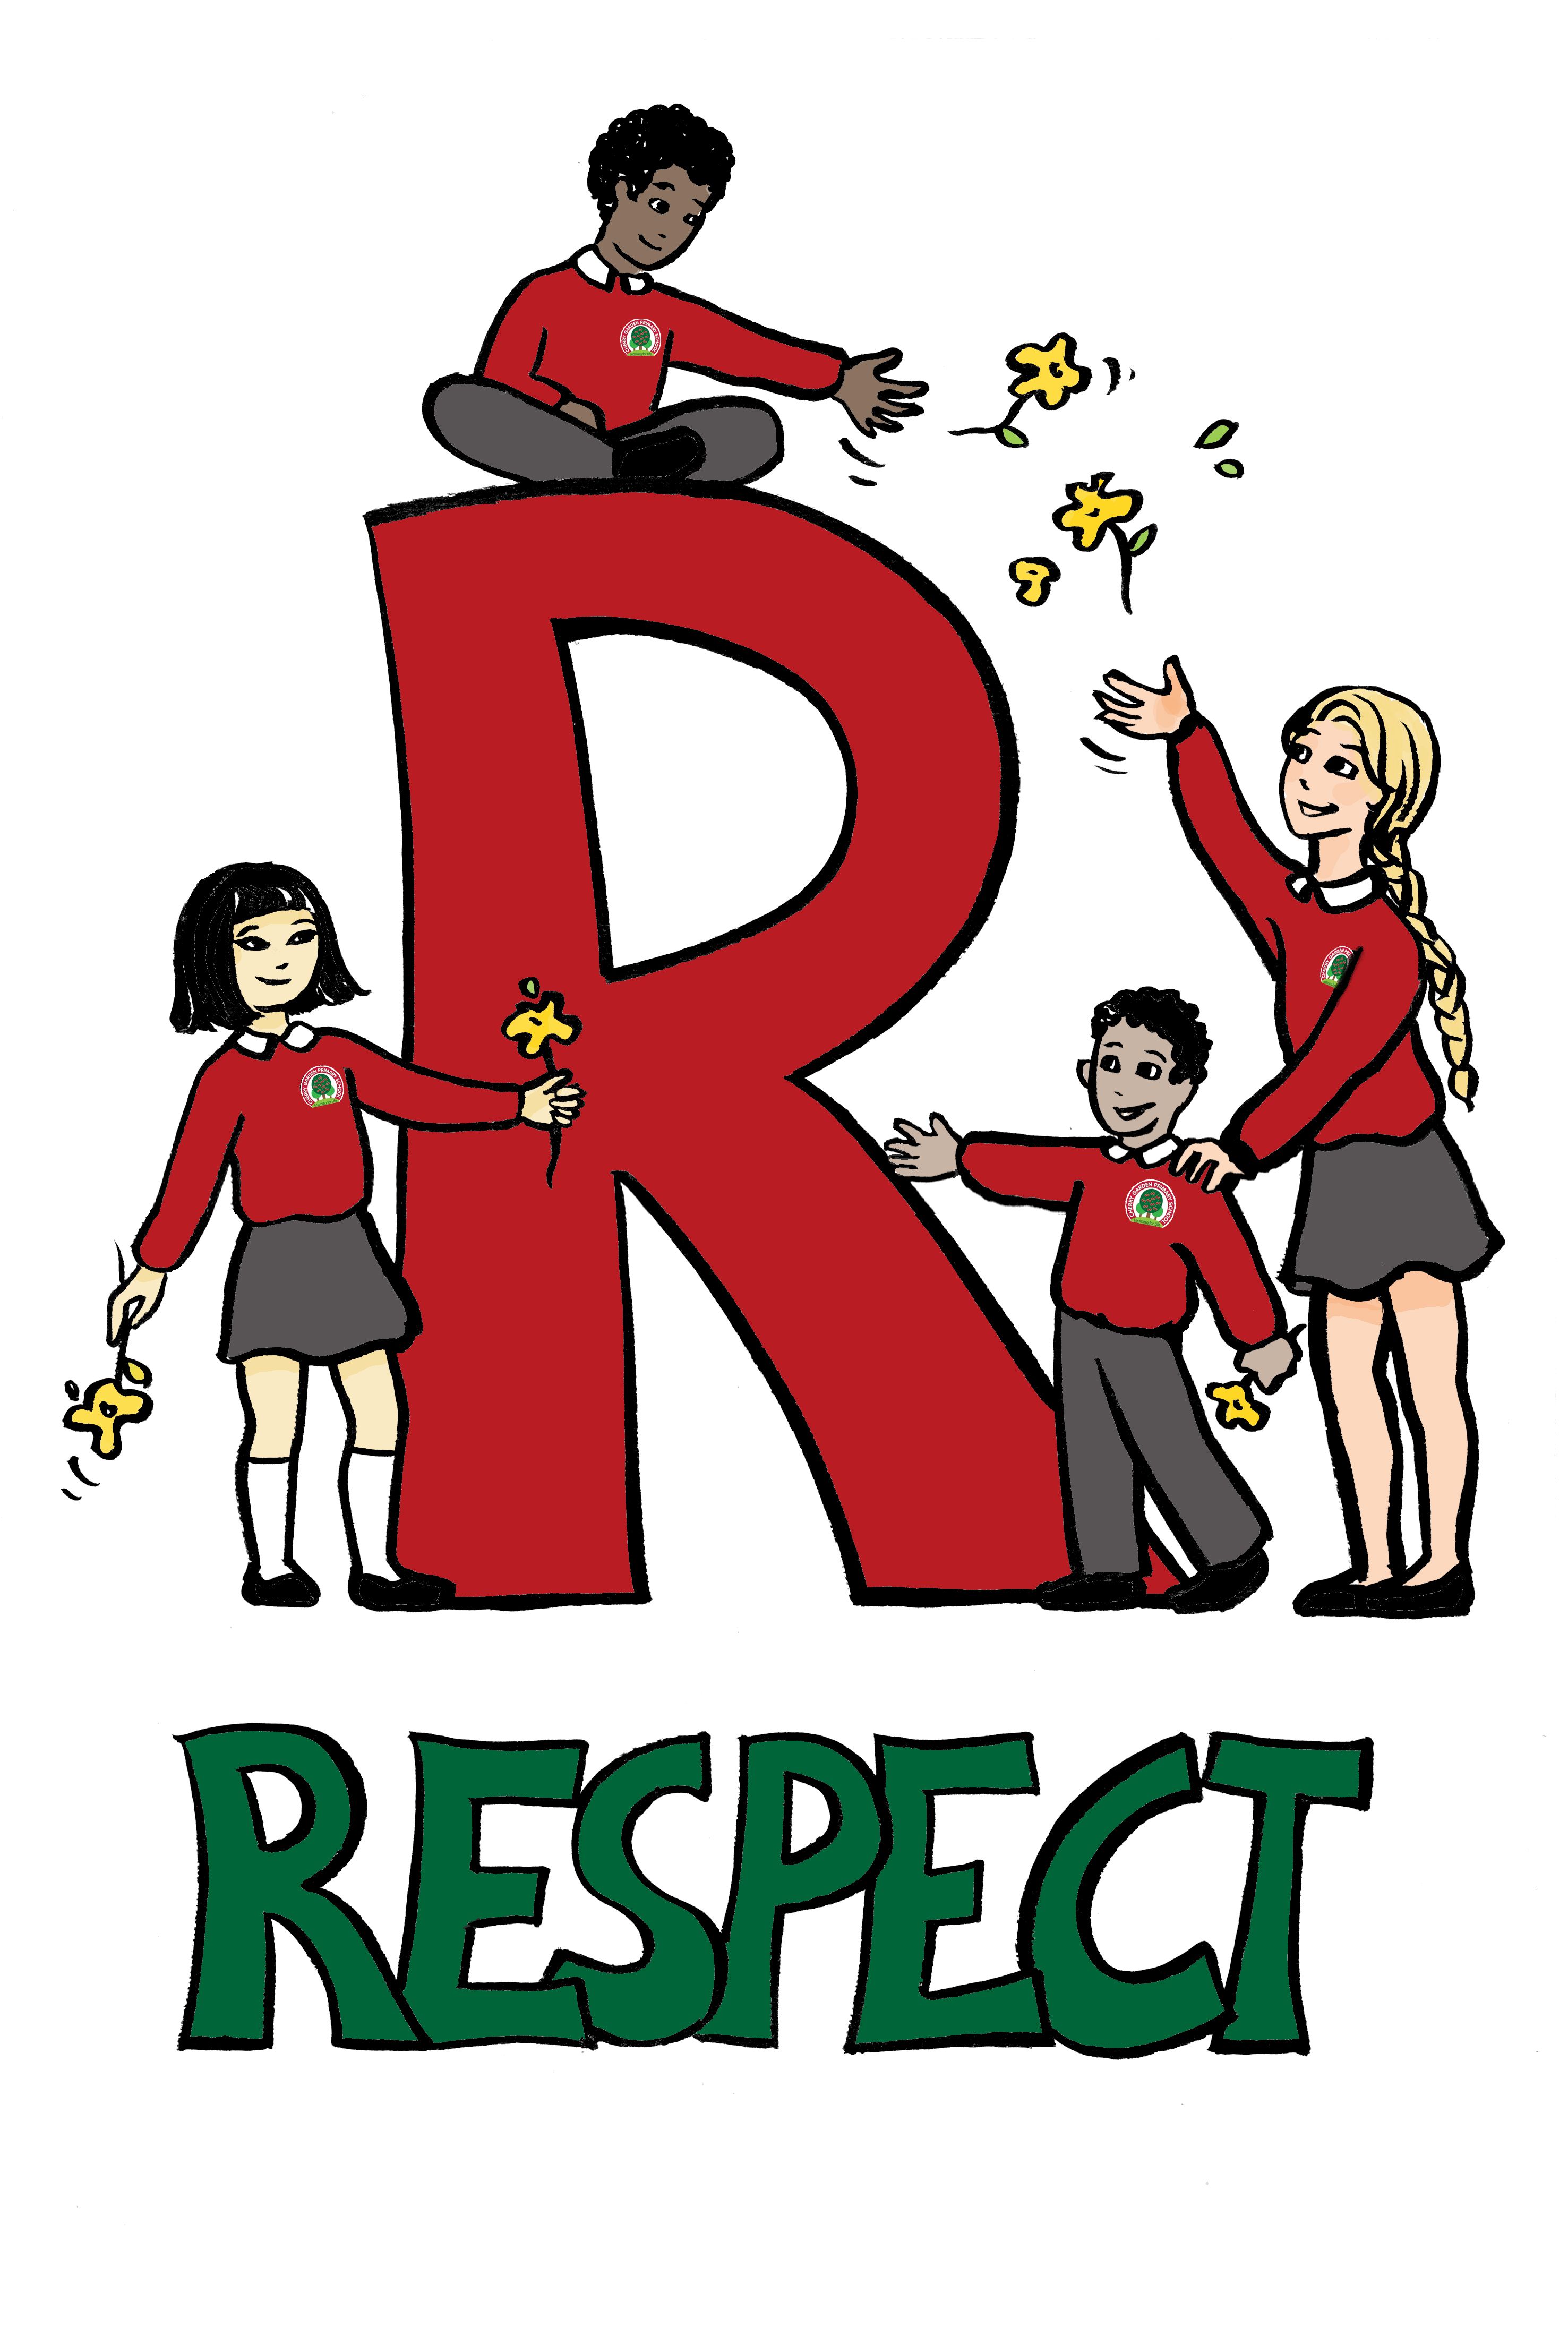 Showing Respect Clipart